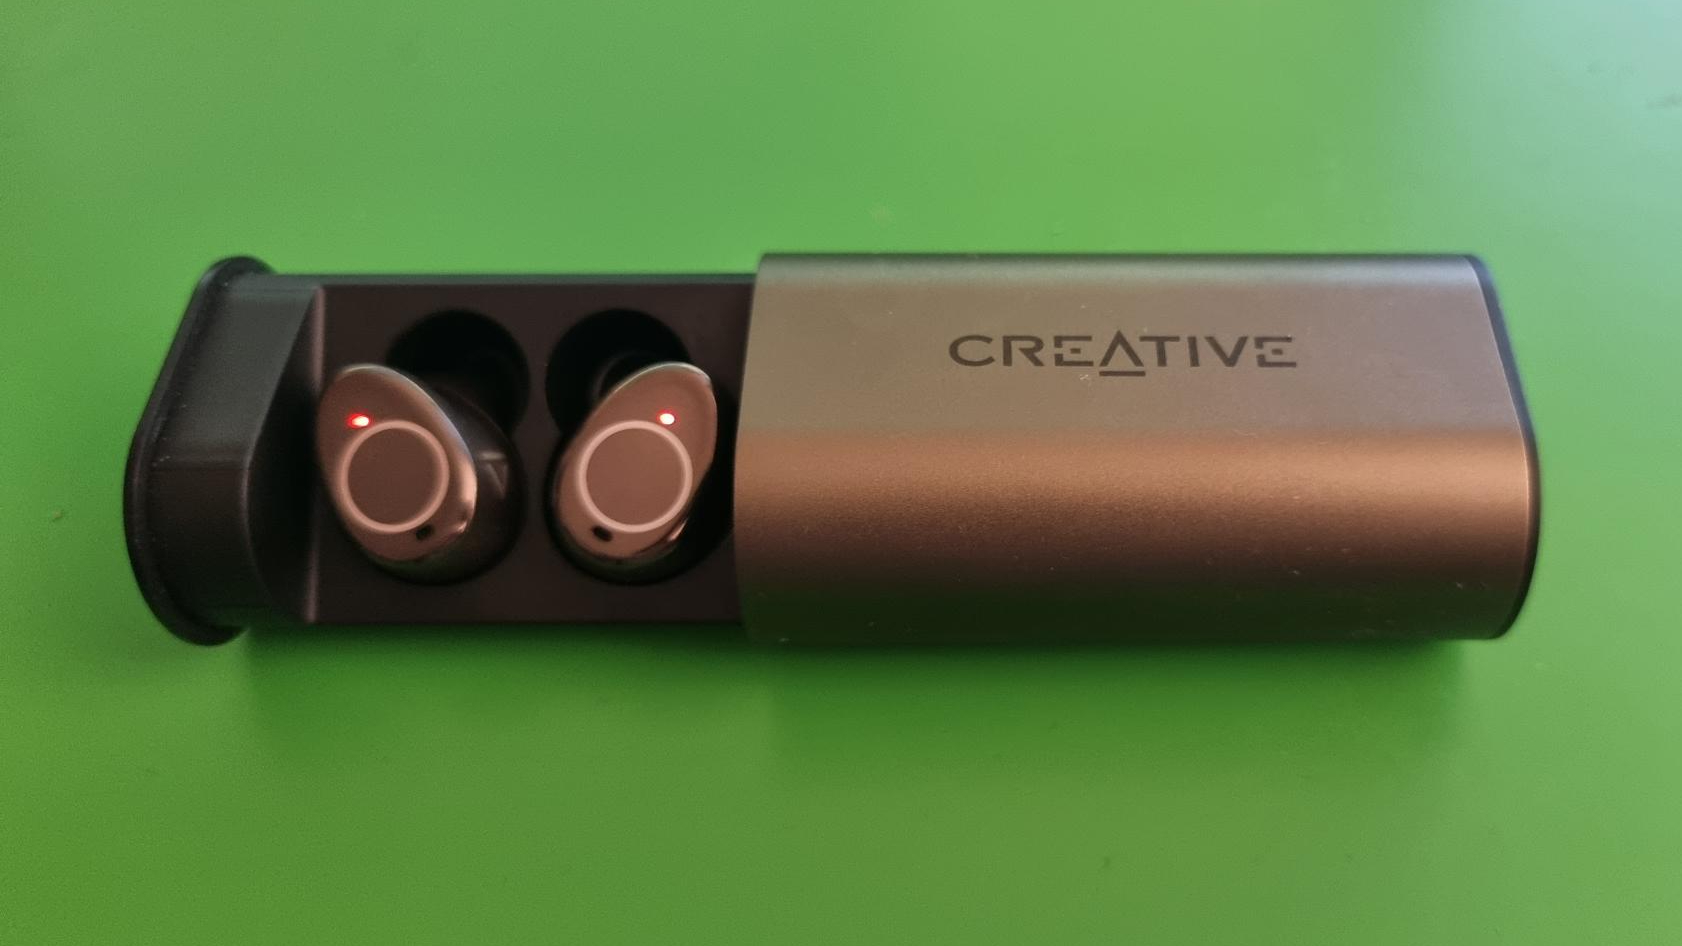 Creative Outlier Pro wireless earbuds